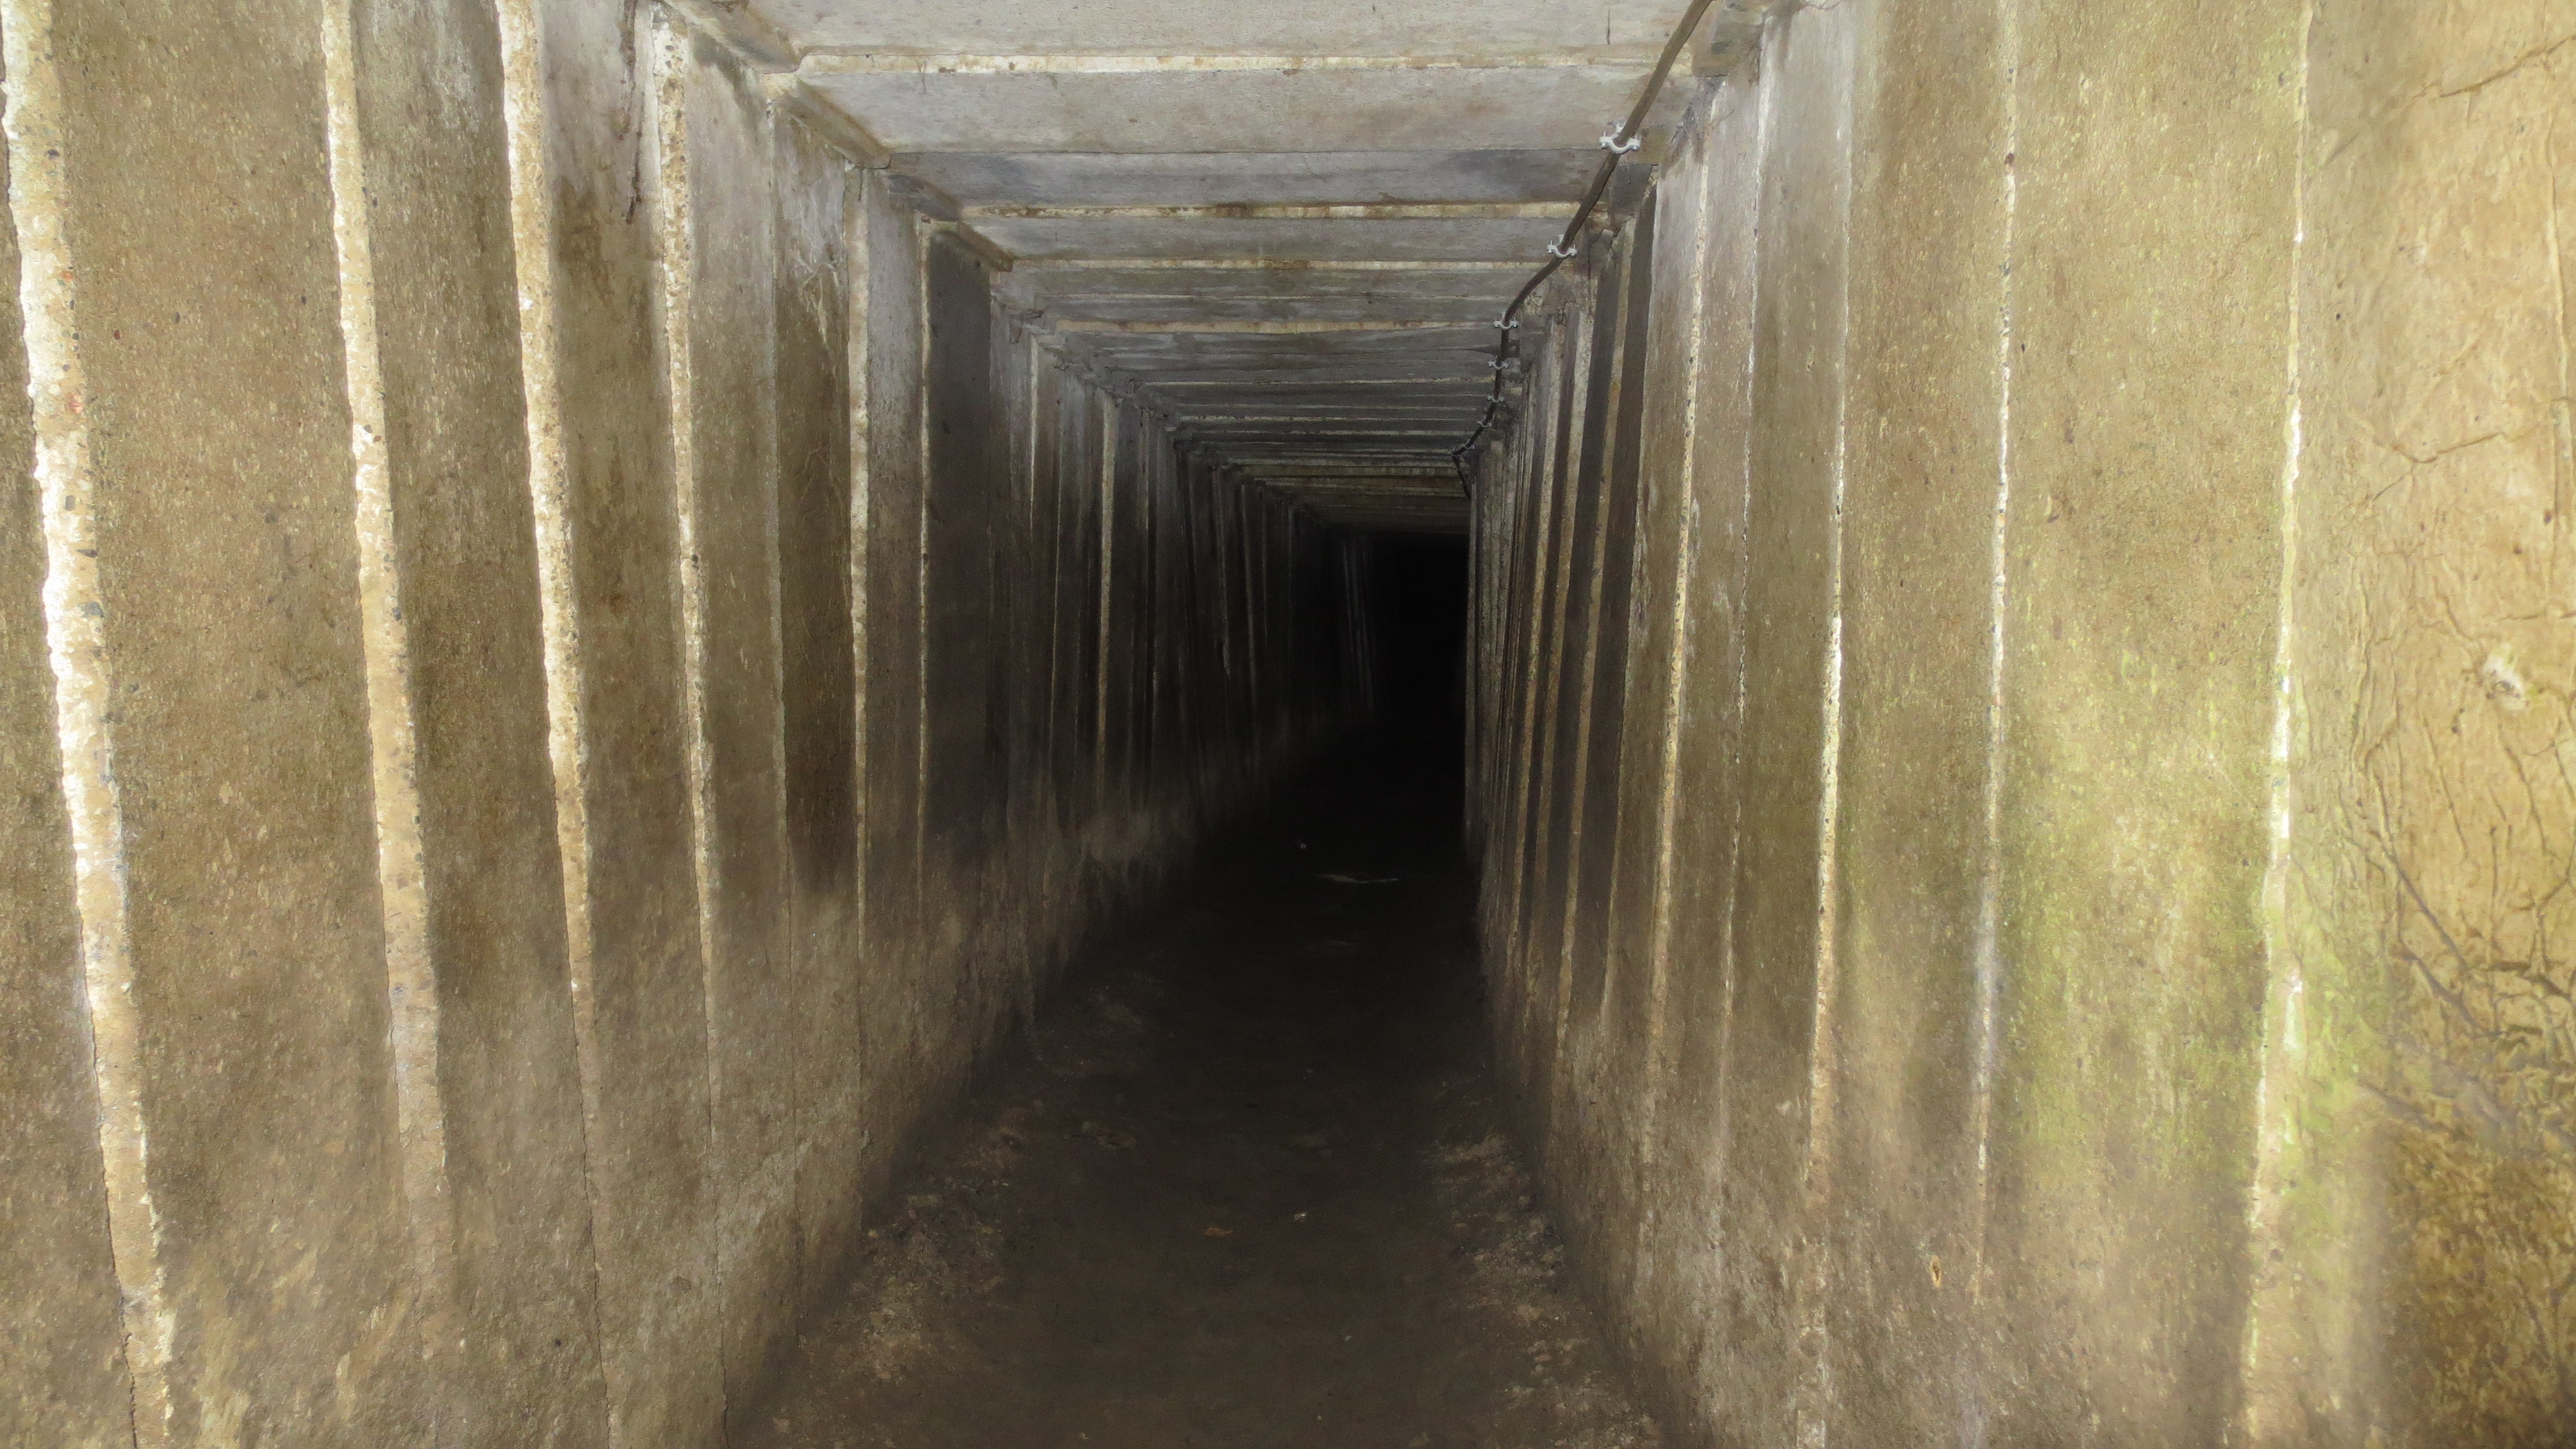 Inside the tunnel dug forward into "No Man's Land"